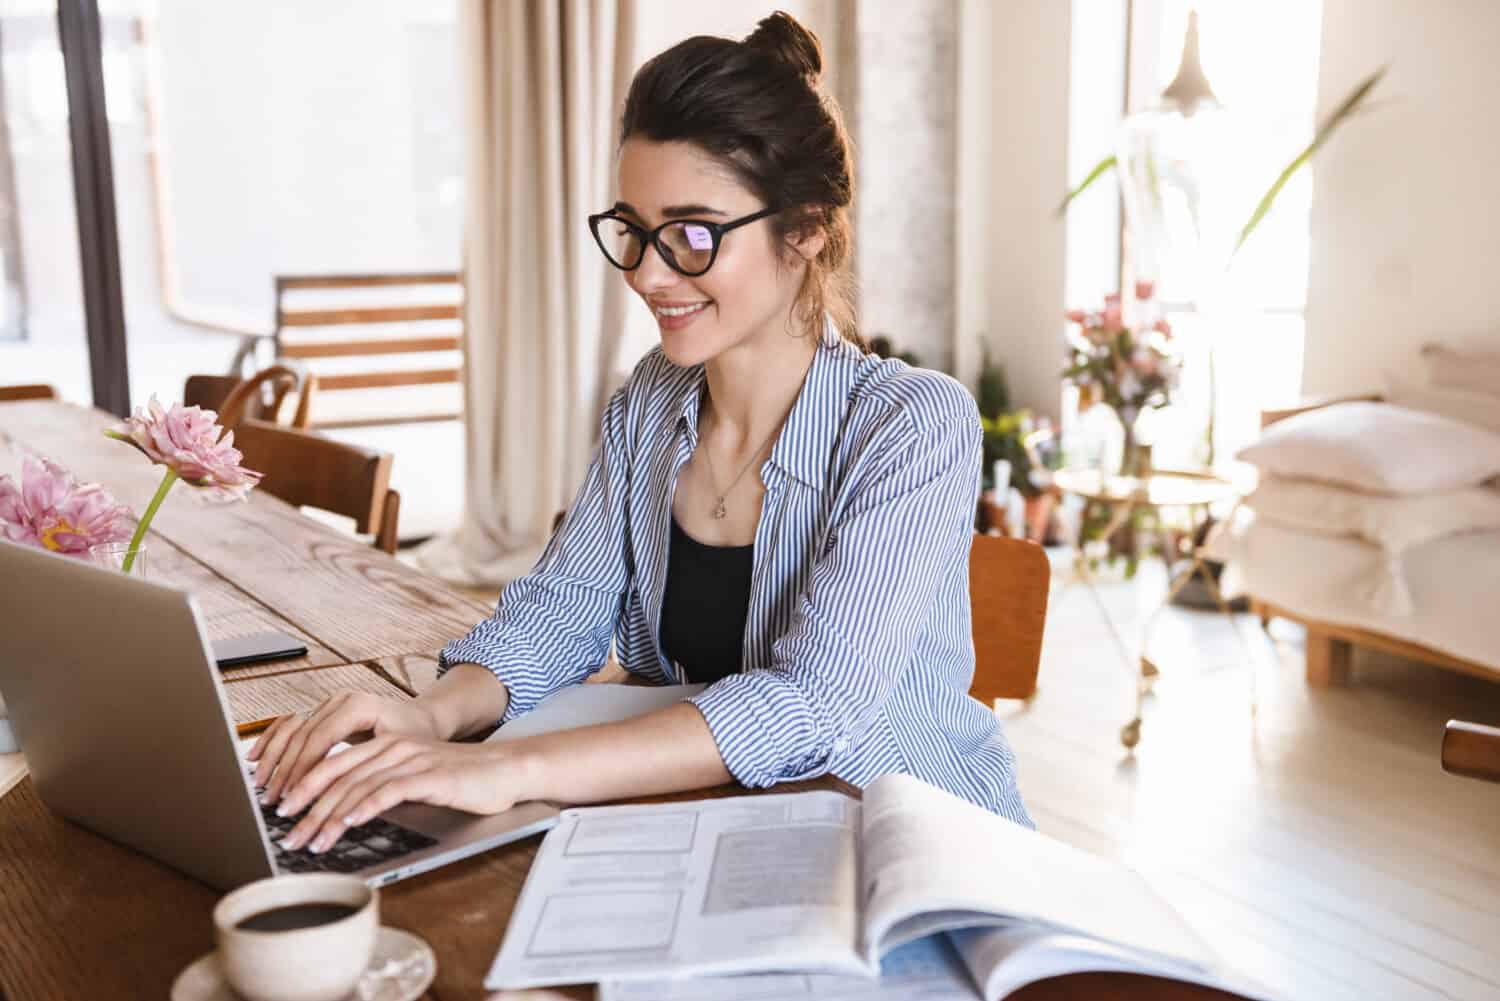 Image of smart positive woman 20s in casual clothing typing on laptop while working or studying at home